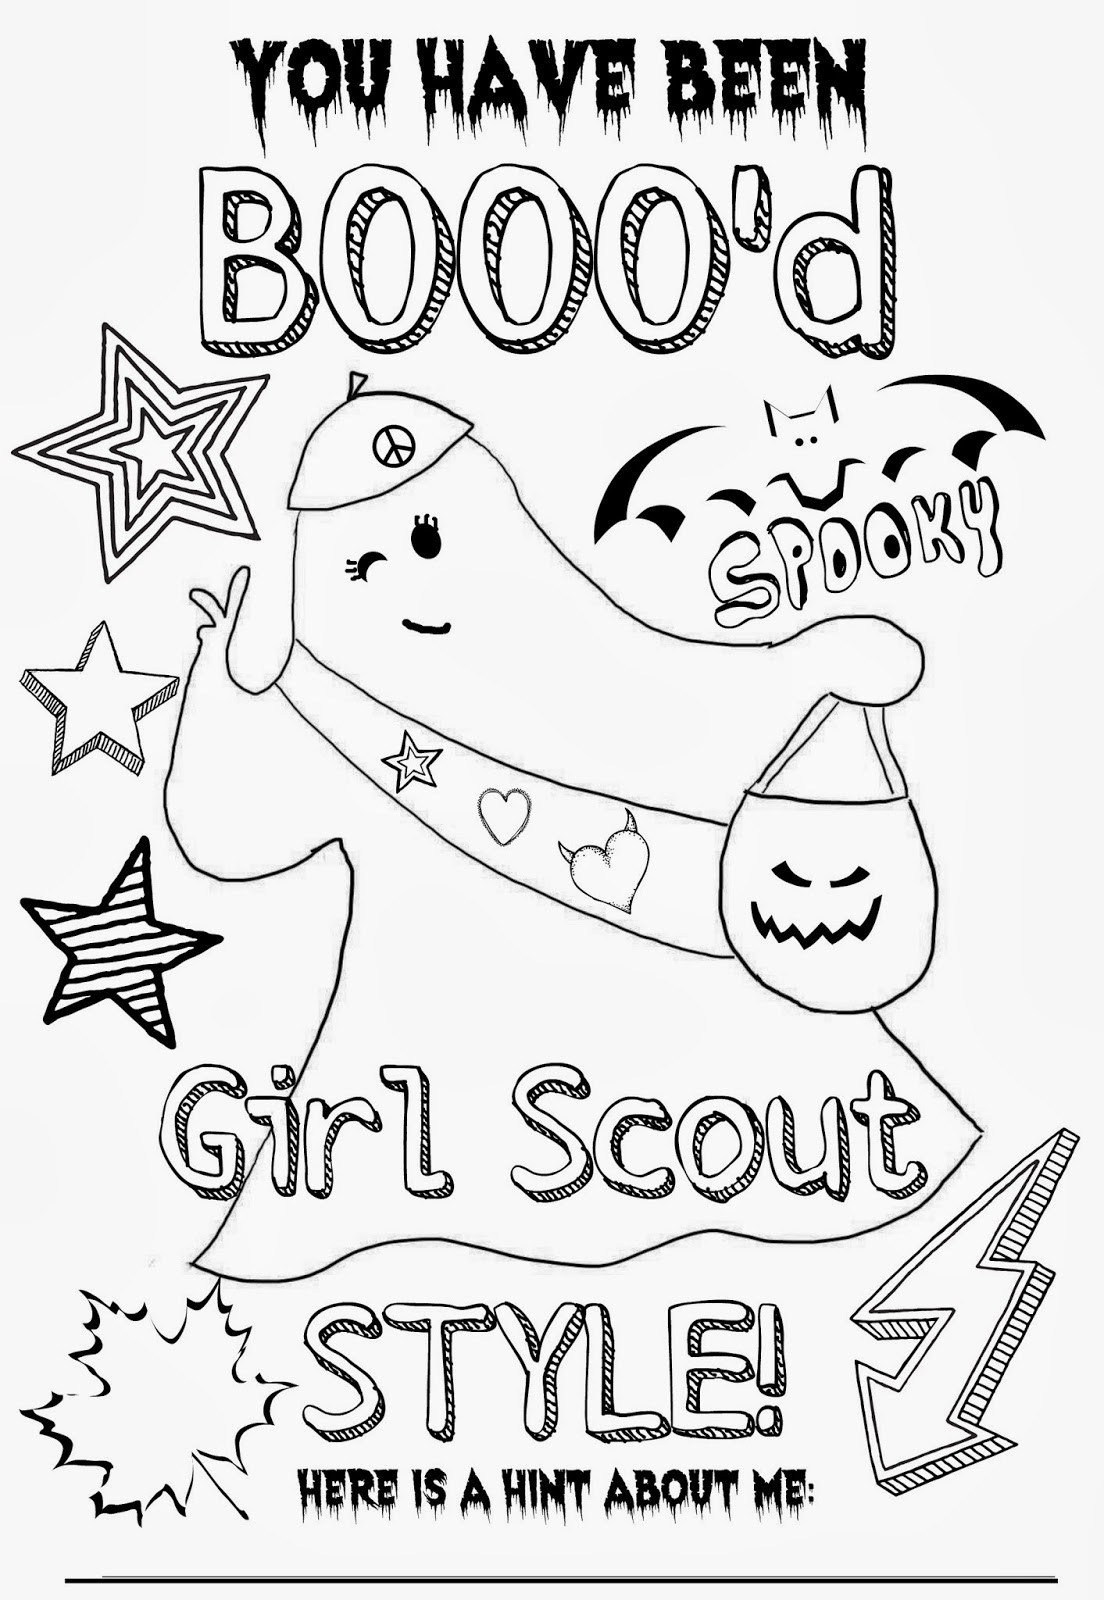 Girl Scout Law Coloring Pages Brownies
 1000 images about Girl Scout on Pinterest